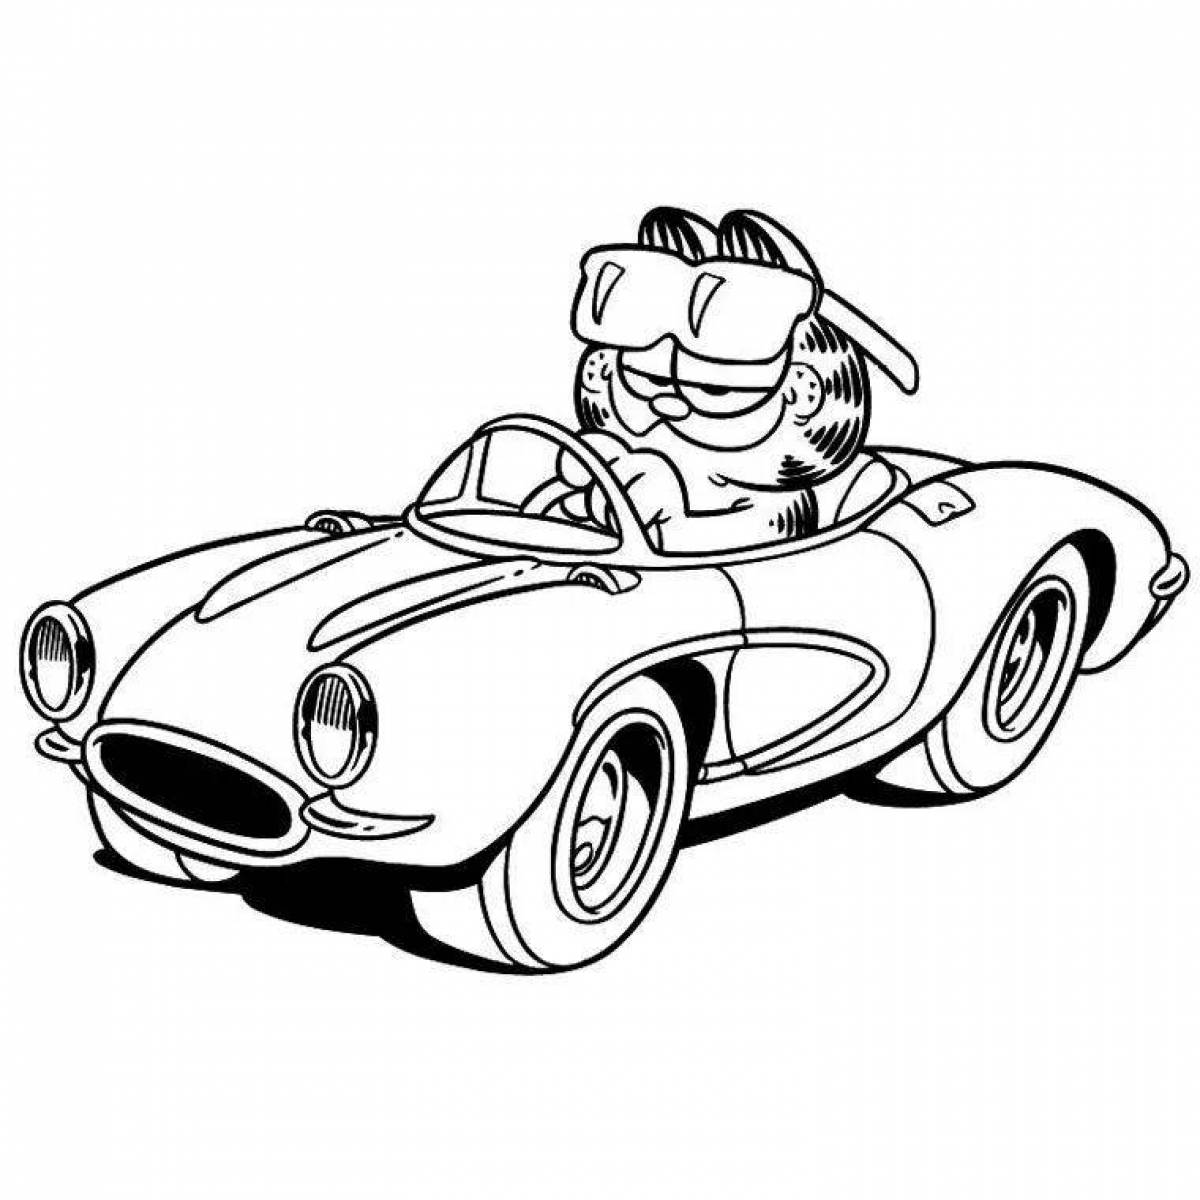 Vansday animated coloring page